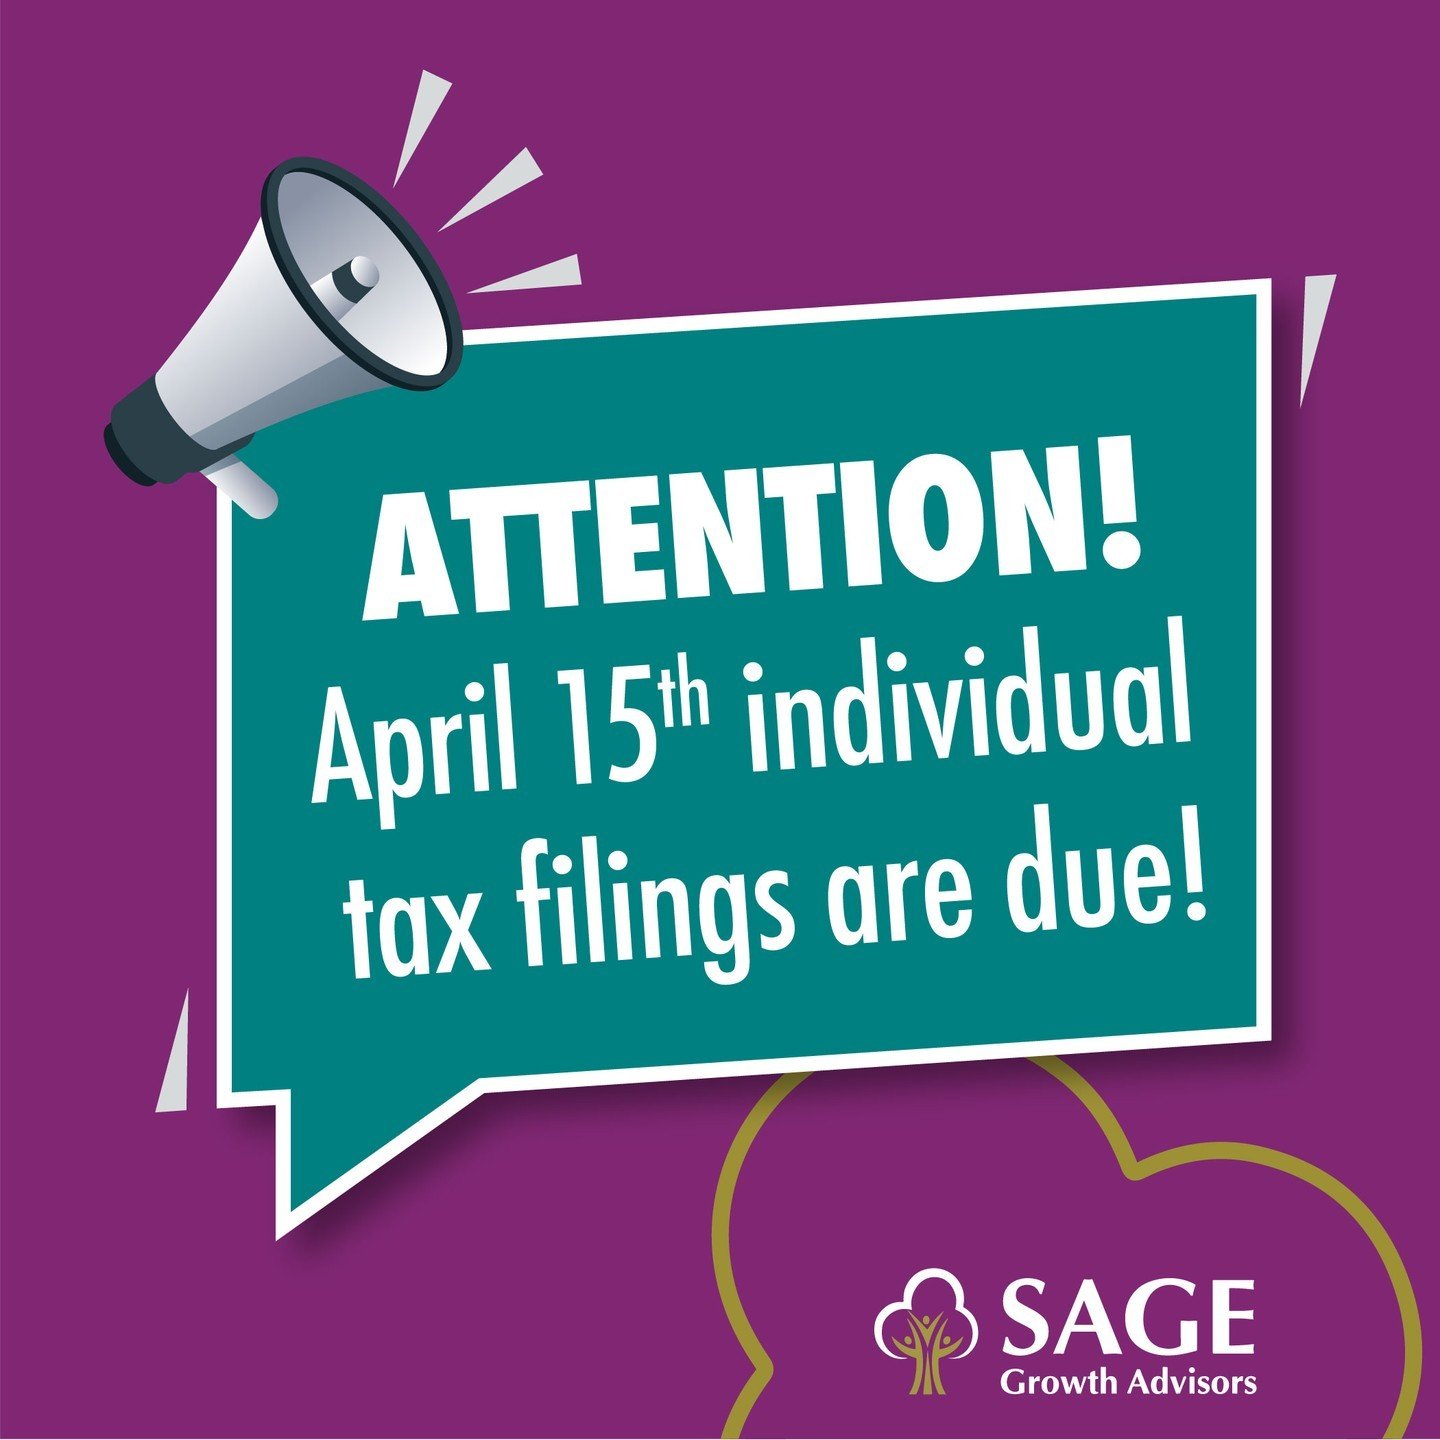 🌻April is here and these are your important dates to remember:

April 15th individual tax filings are due‼️ 

Need an extension or help completing your taxes? We can help!! Head over to our website (link in bio) click 👉 &ldquo;CONNECT NOW&rdquo; 👈